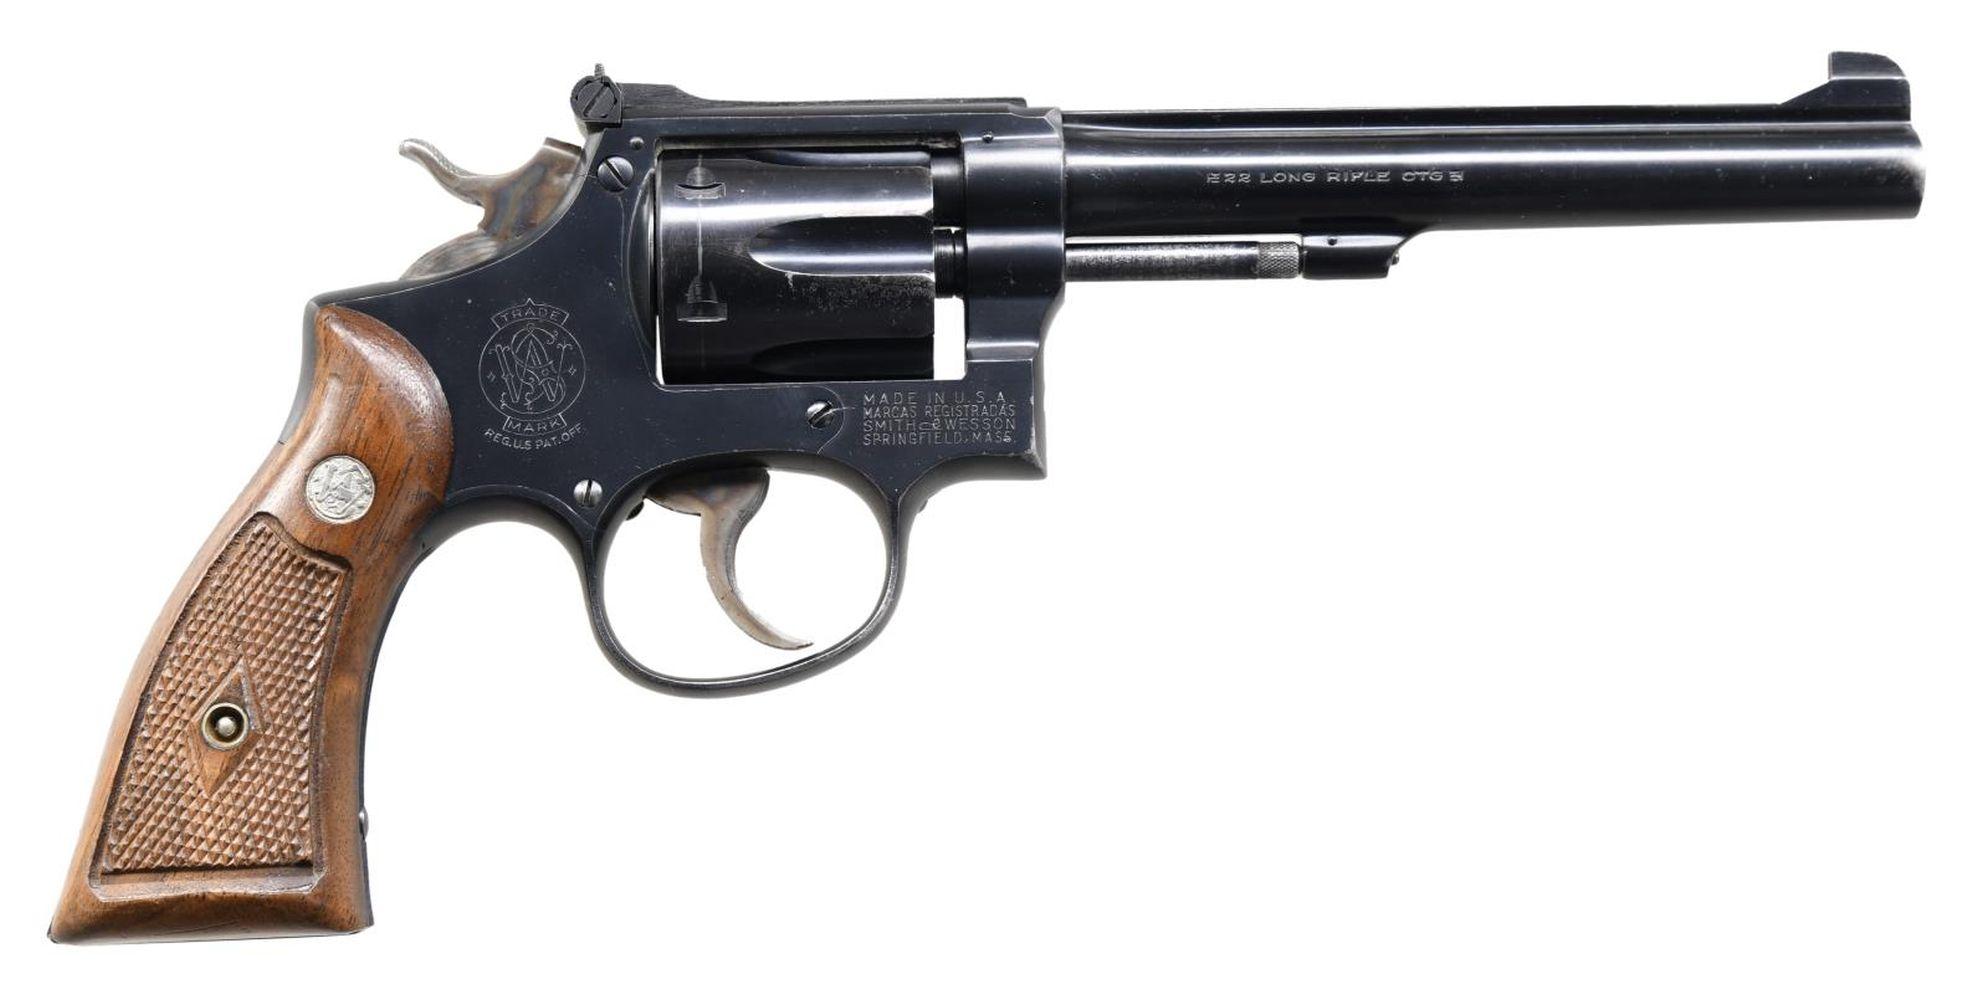 SMITH & WESSON MODEL K22 MASTERPIECE DOUBLE ACTION